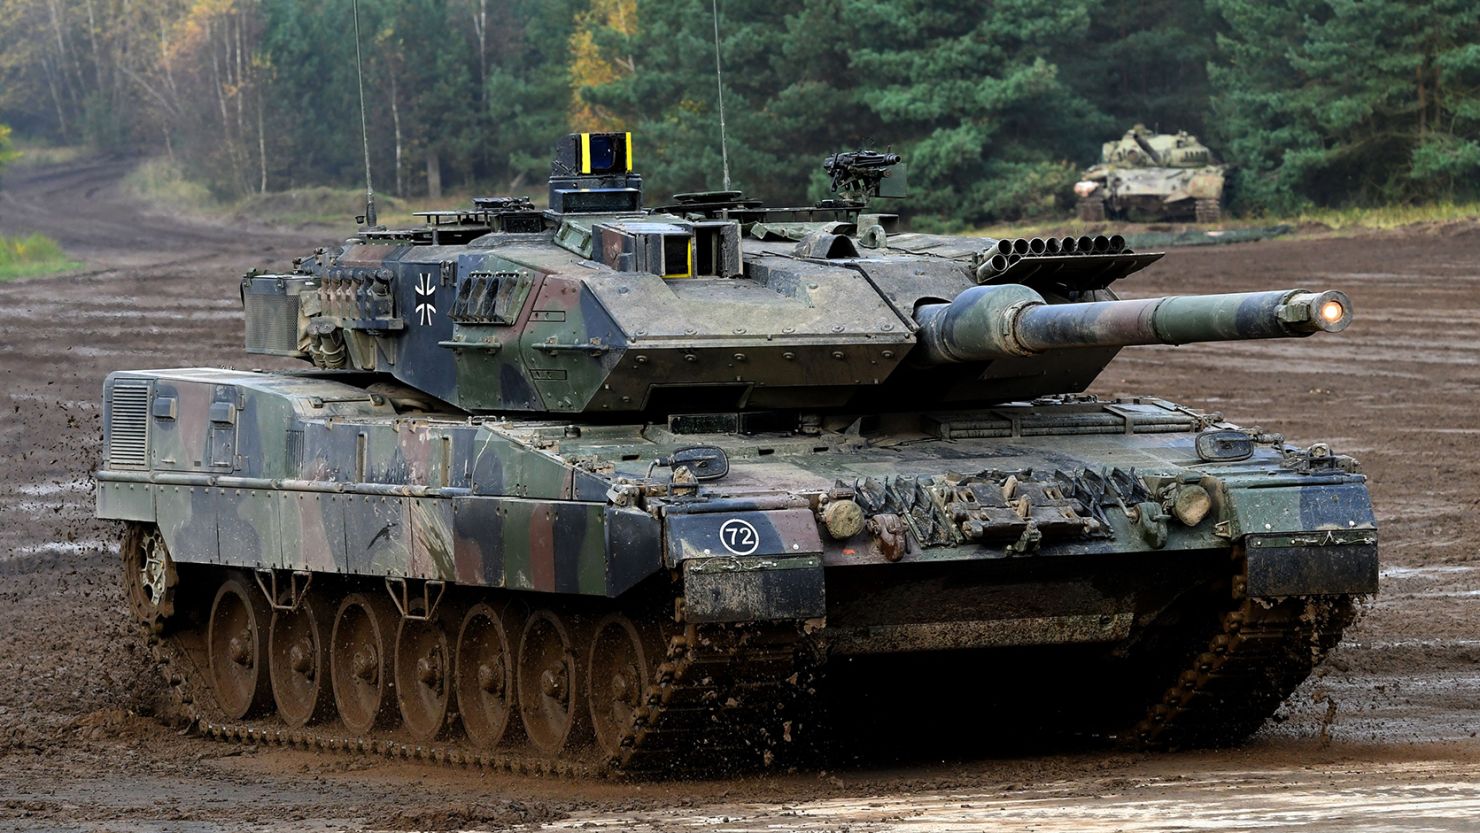 A number of European countries use Leopard tanks.